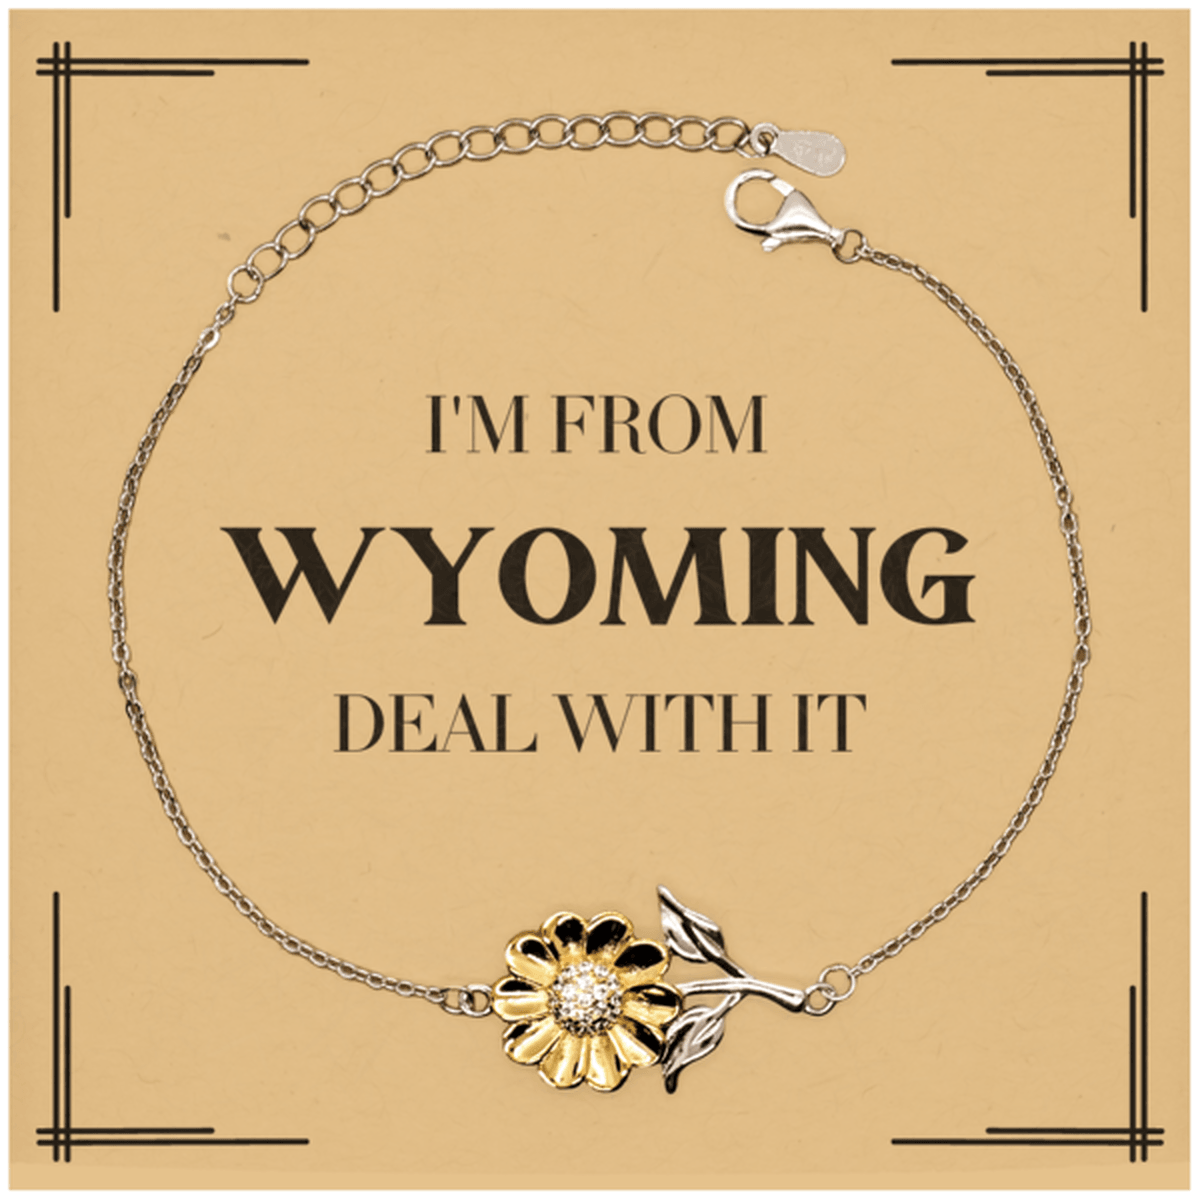 I'm from Wyoming, Deal with it, Proud Wyoming State Gifts, Wyoming Sunflower Bracelet Gift Idea, Christmas Gifts for Wyoming People, Coworkers, Colleague - Mallard Moon Gift Shop